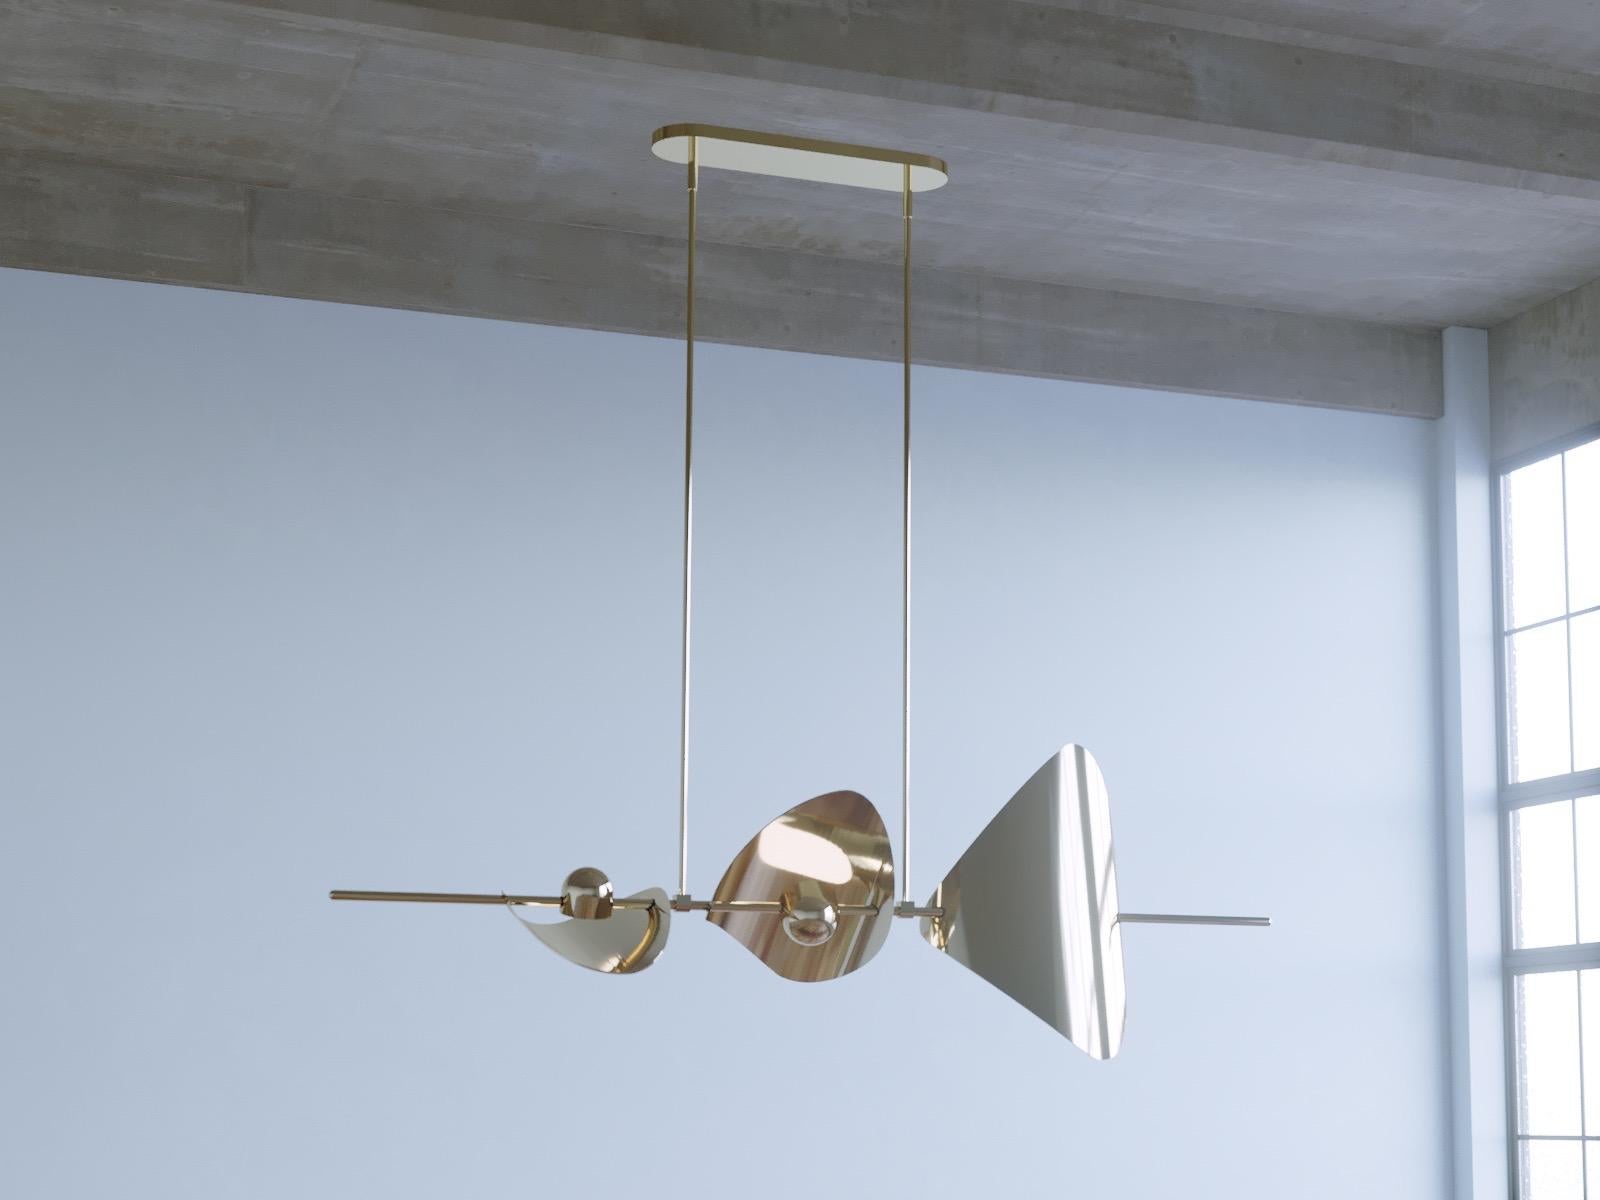 Bonnie Config. 4 Contemporary Linear LED Chandelier, Solid Brass @ 300cm/118